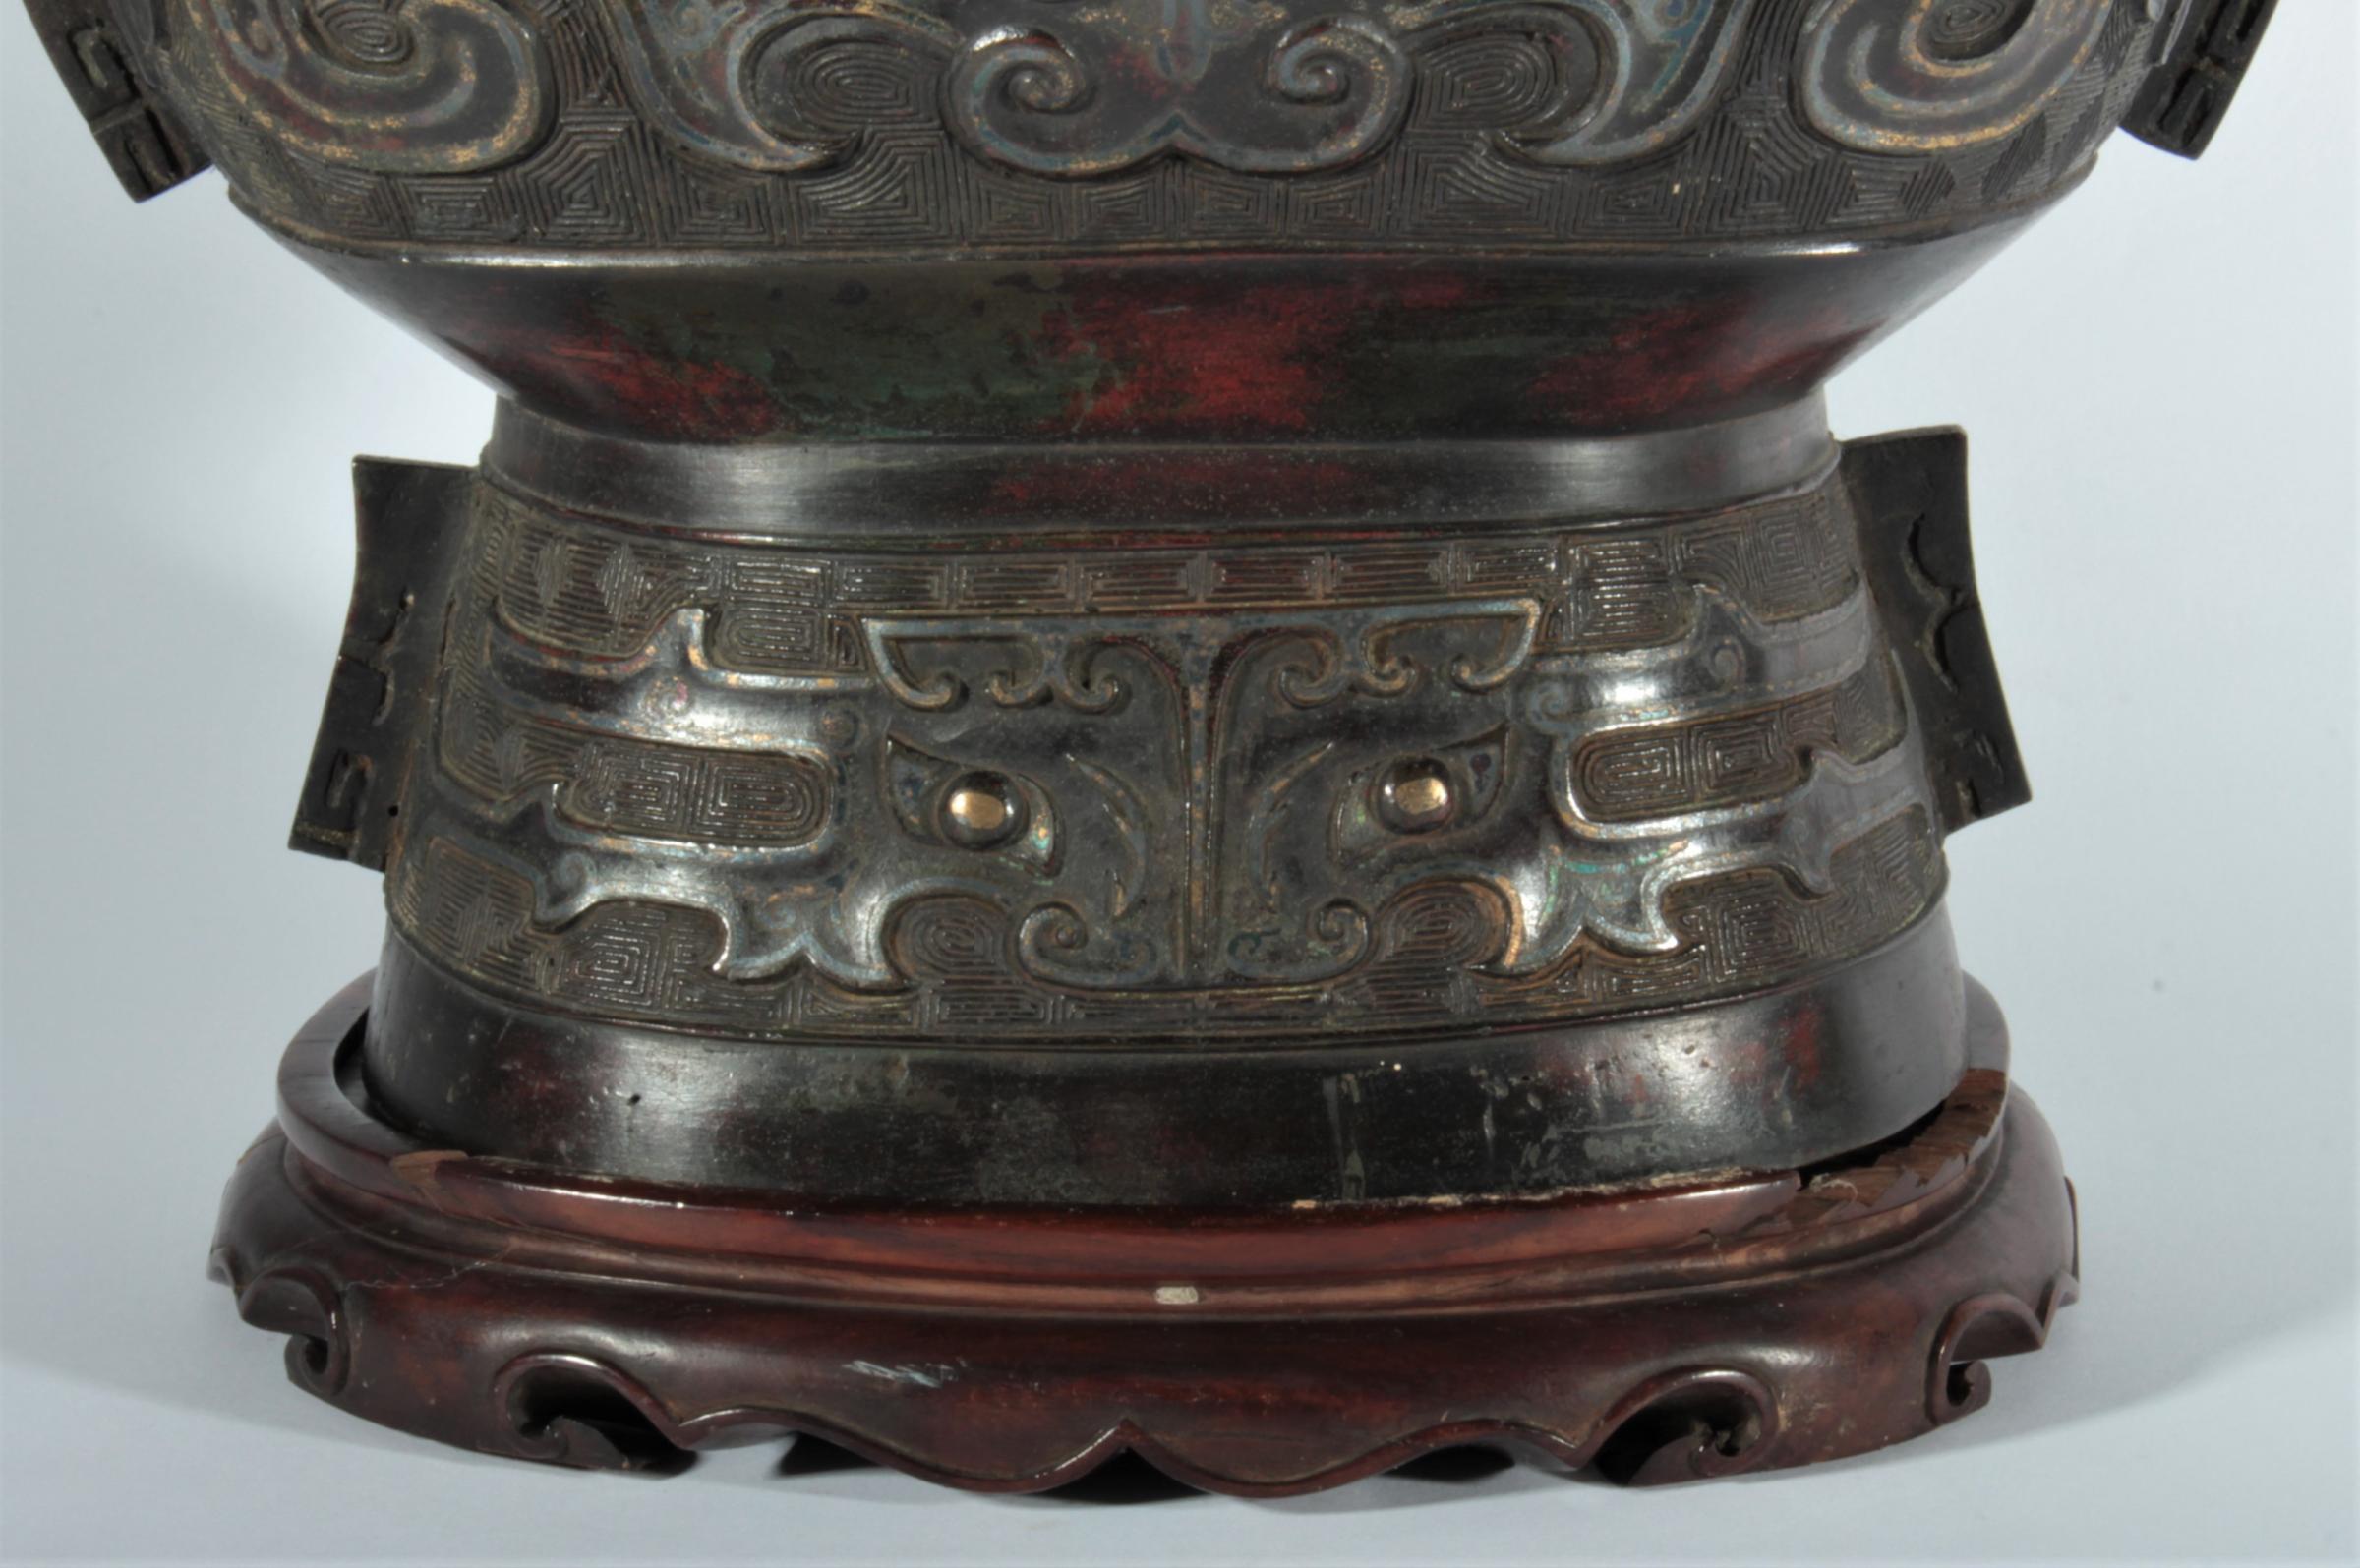 Very rare chinese archaistic gold and silver-inlaid bronze vase, 17th century, Ming Dynasty 